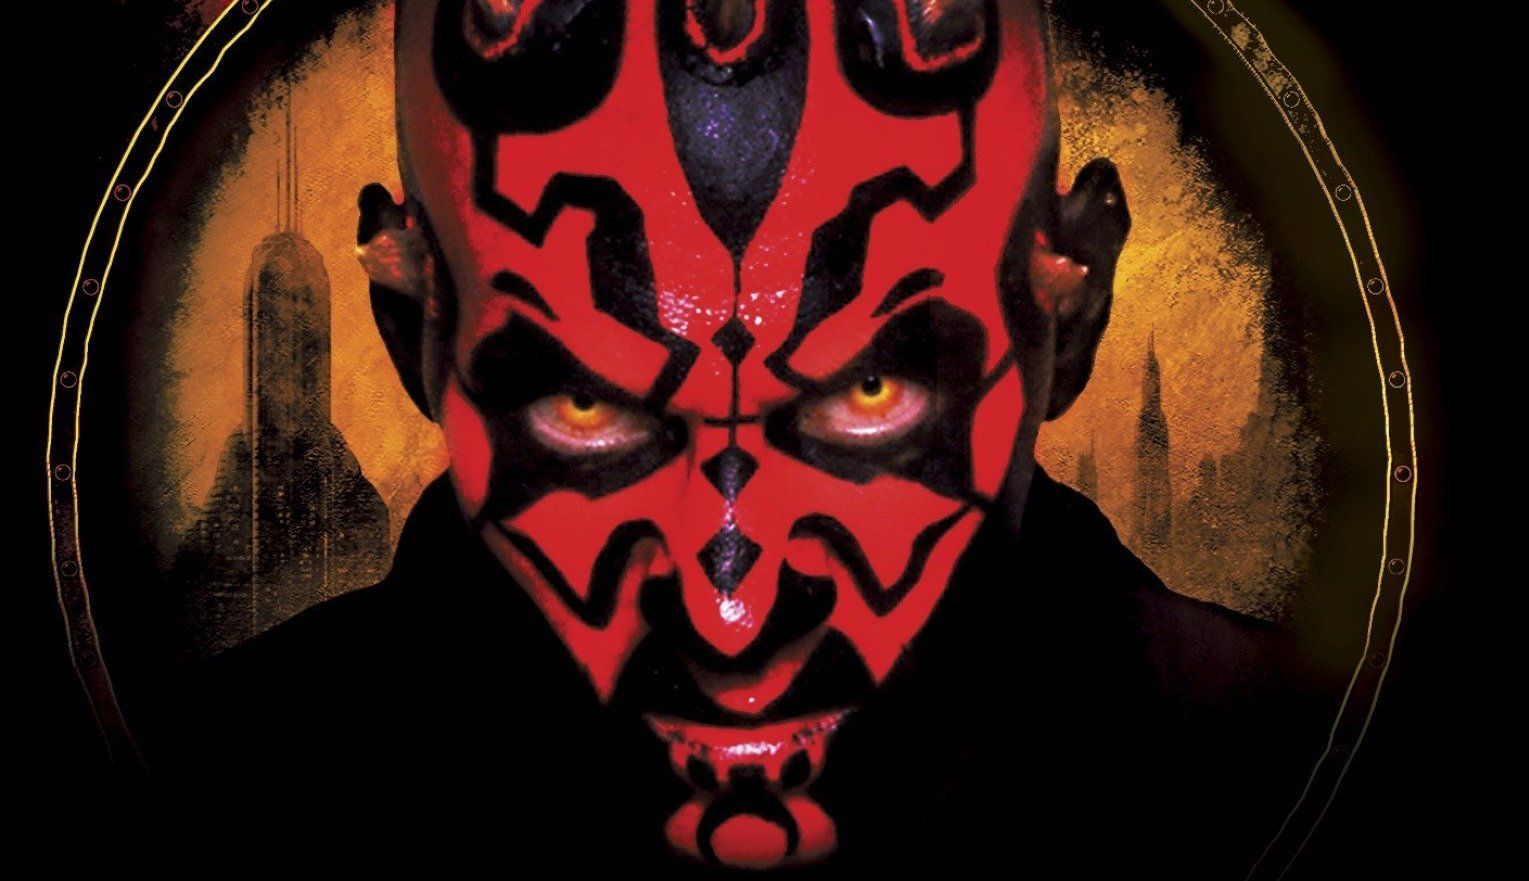 Star Wars 10 Things You Didn’t Know About Darth Maul According To Ranker